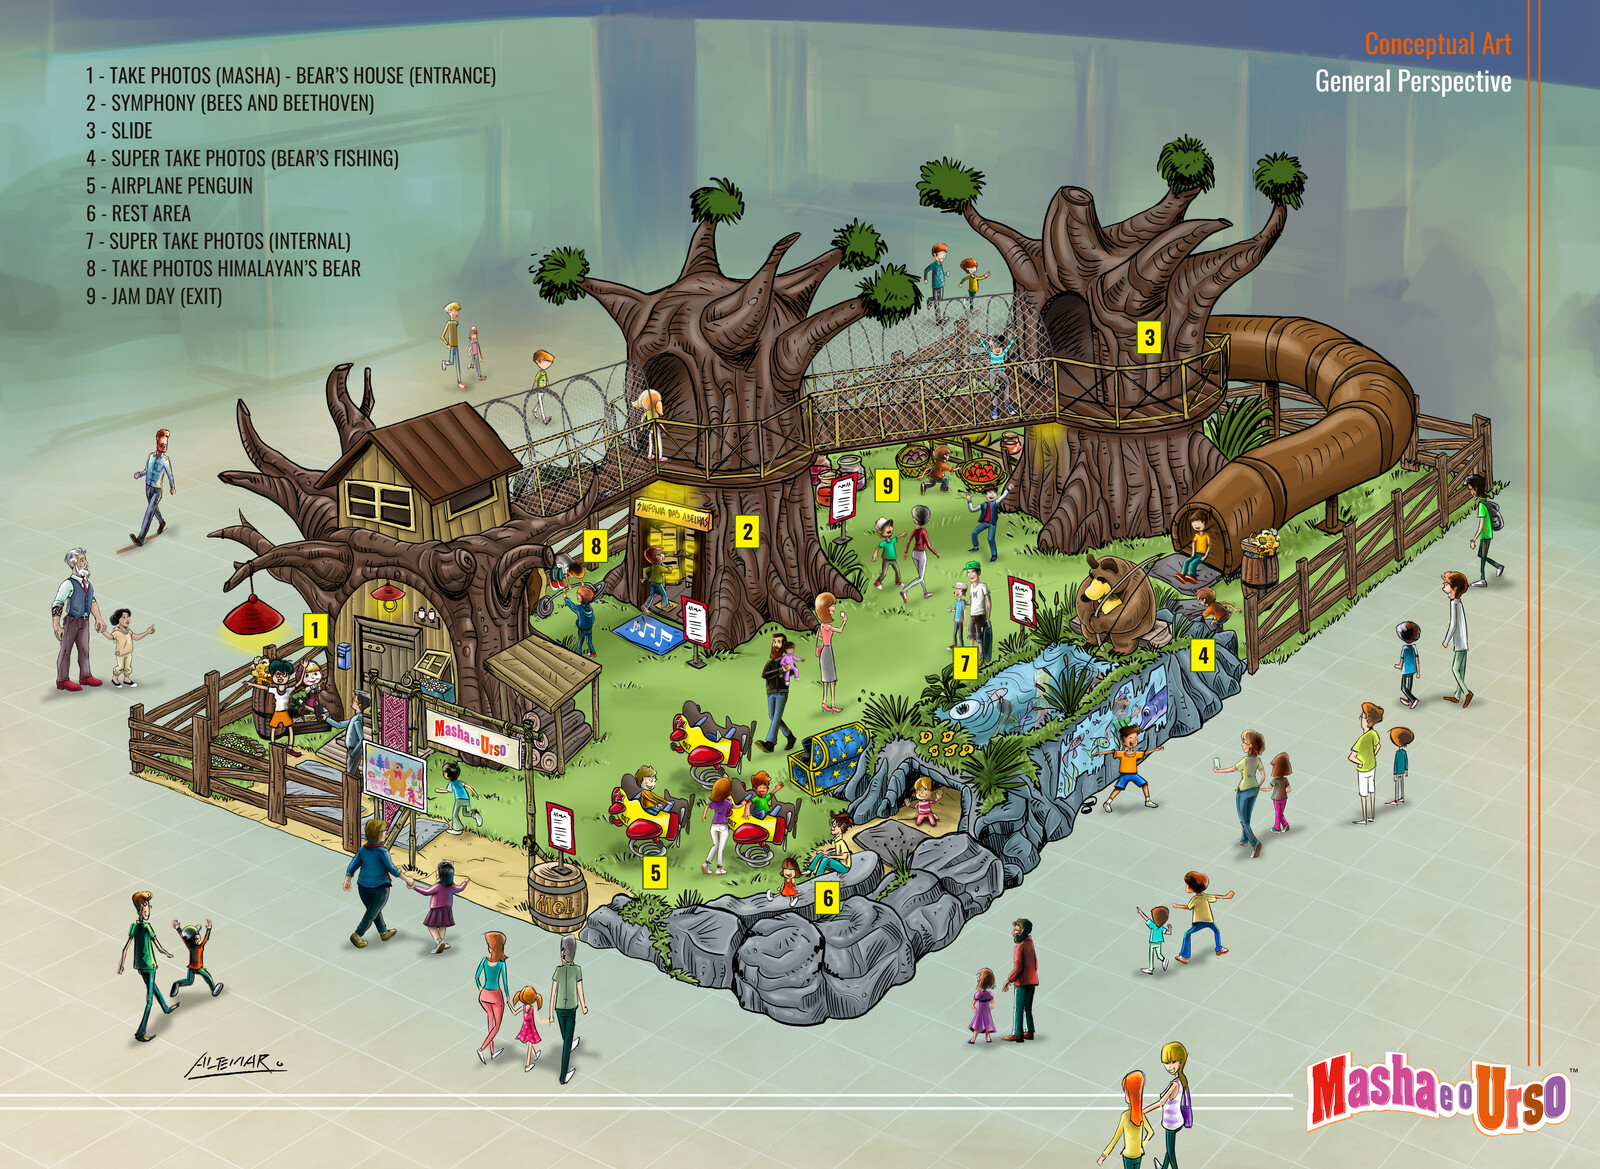 Layout of Masha and the Bear Event for Shopping Mall. Not building.